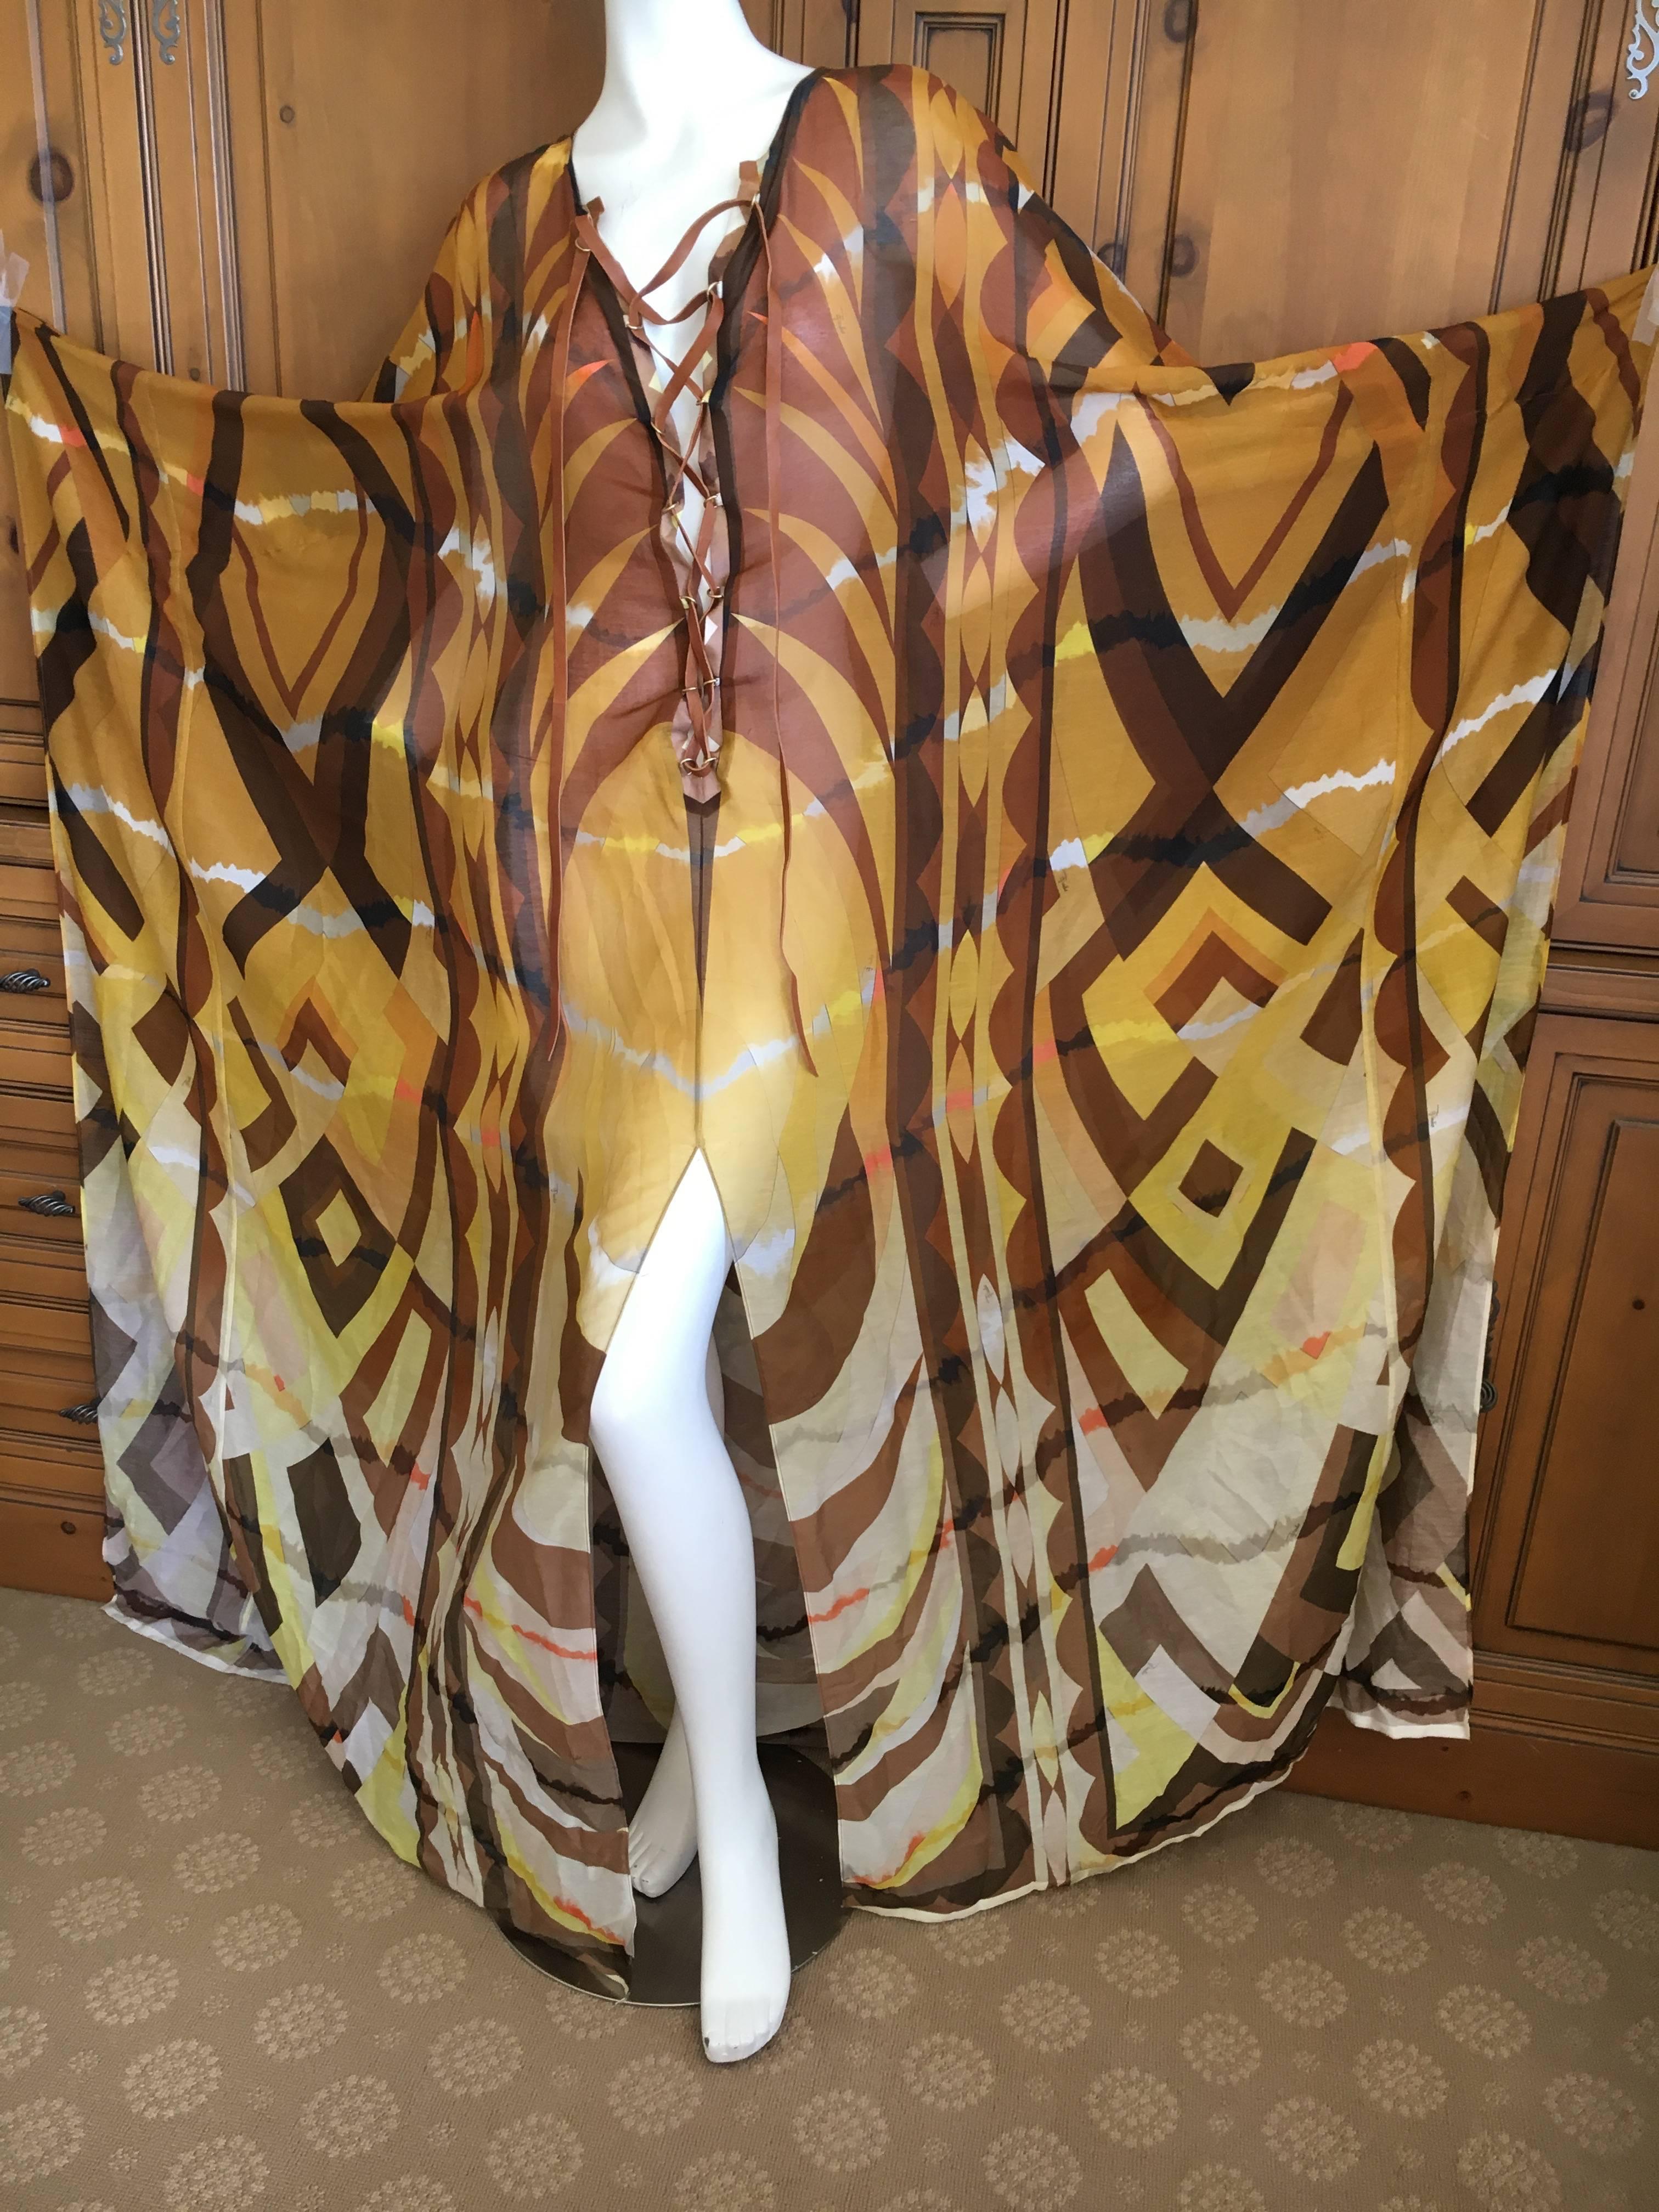 Emilio Pucci Sheer Patterned Caftan with Leather Lace Up Straps New with Tags.
Exquisite sheer silk cotton blend patterned caftan with leather lace up collar from Emilio Pucci.
Brand New , unworn with tags.
Marked size 40, seems to run large.
Never